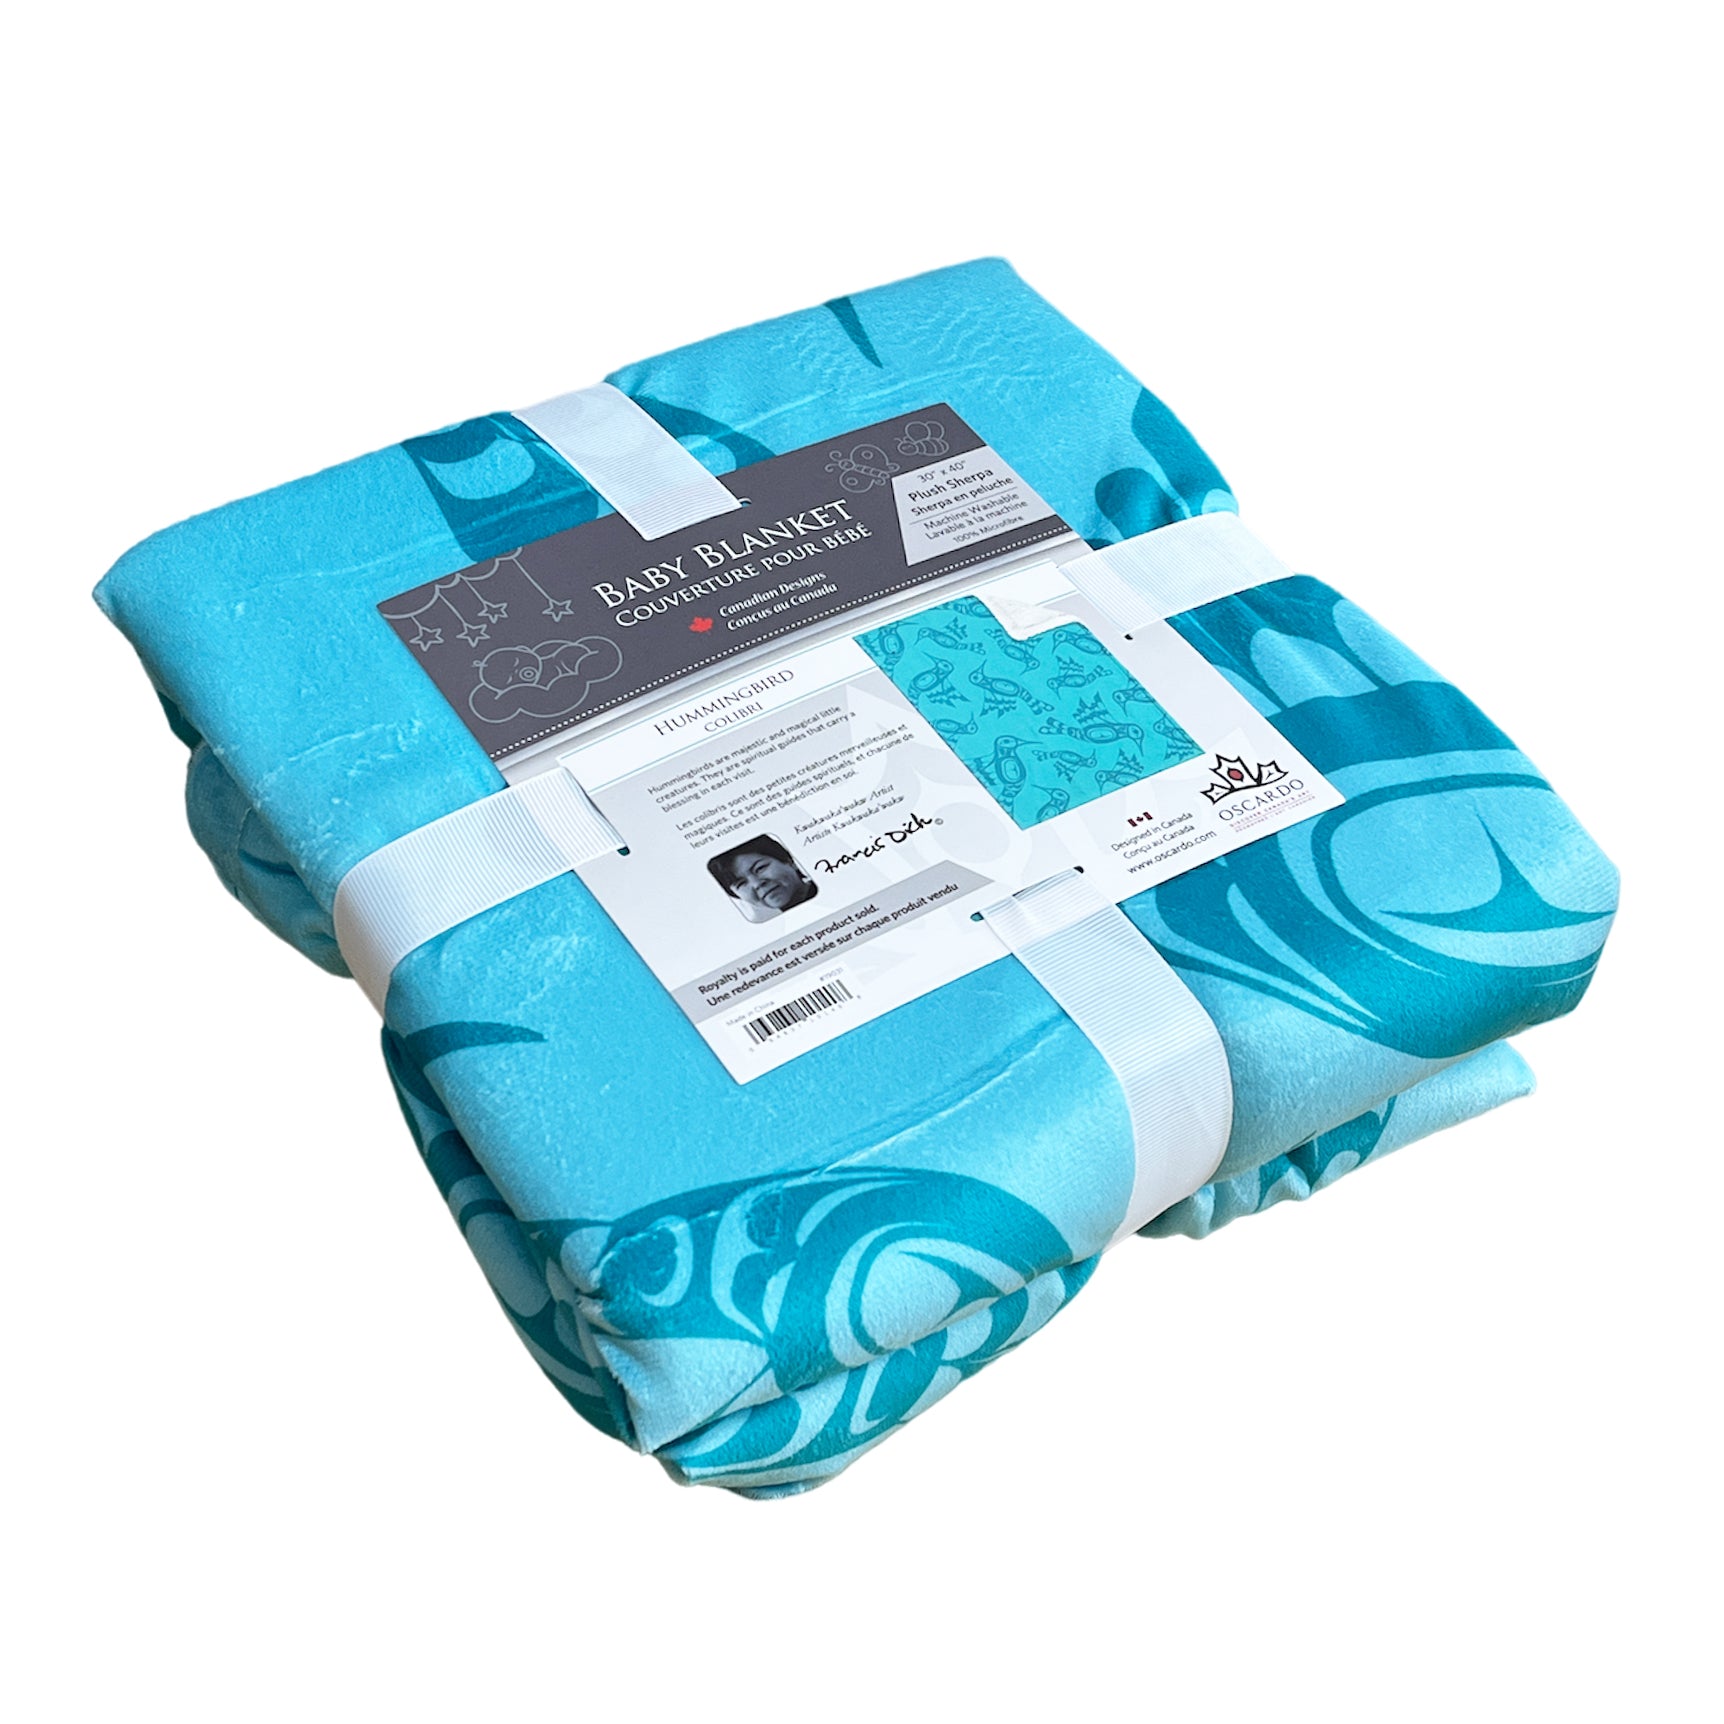 Francis Dick Hummingbird Baby Blanket - Out of stock